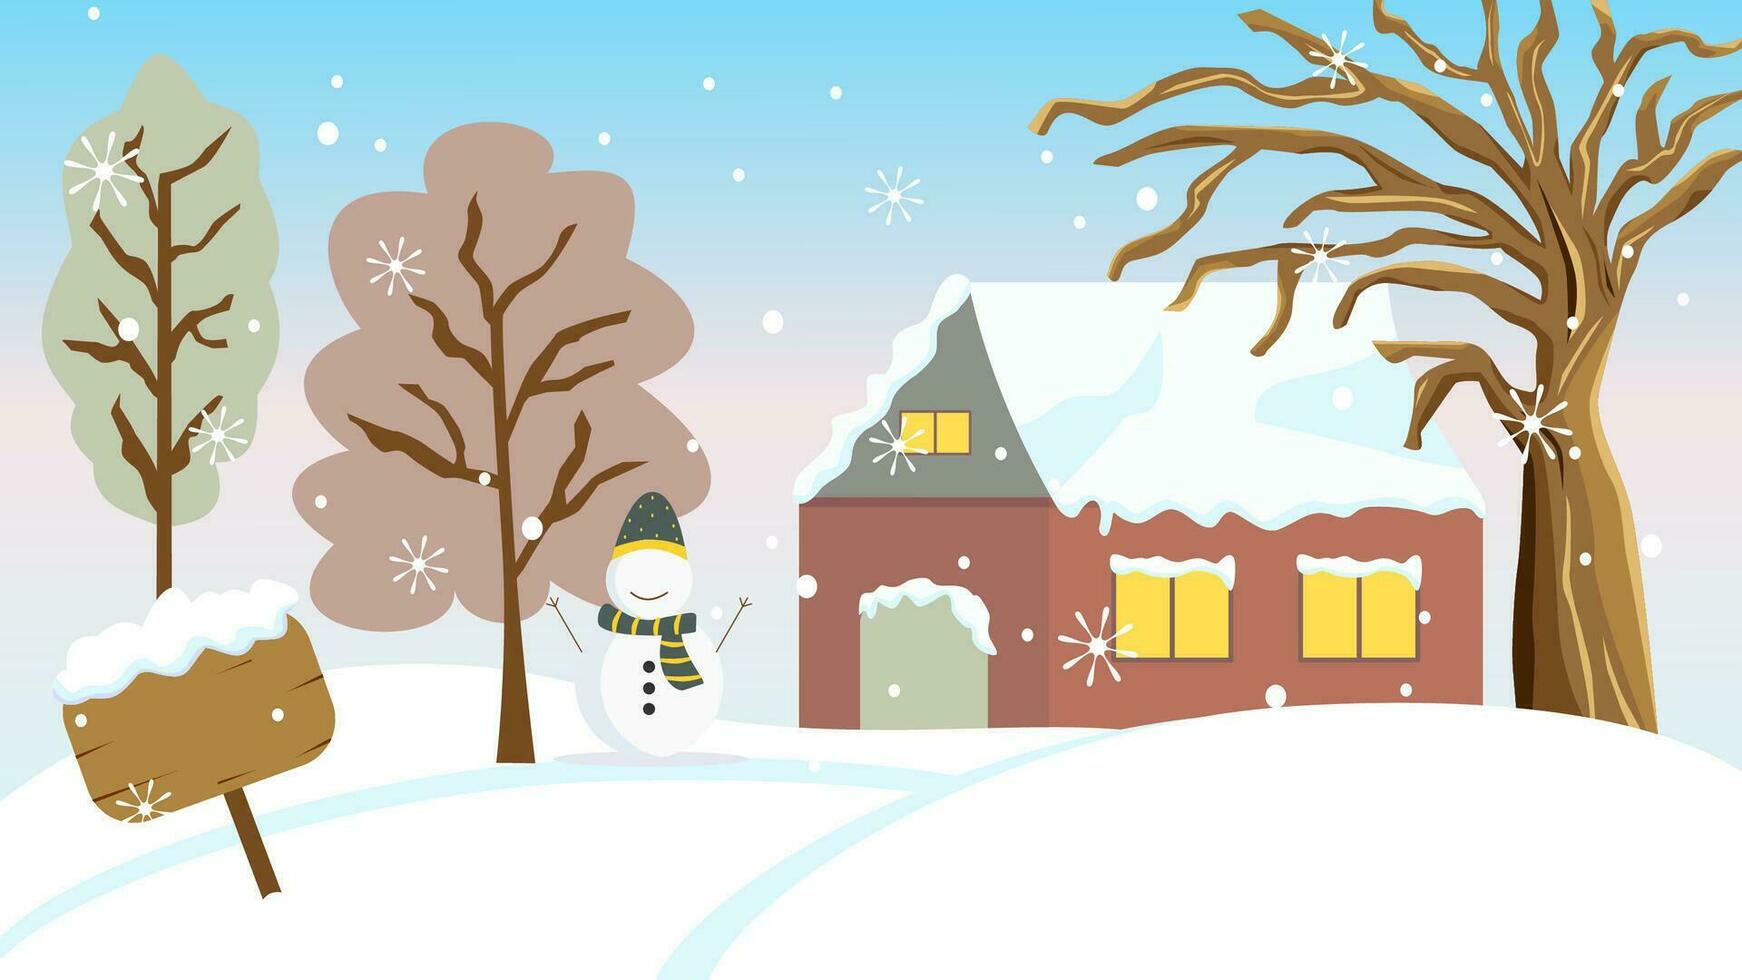 Winter vector landscape with house and wooden sign covered by snow, trees and big dried tree, snowman, and snow flake falling down. Wintertime illustration with copy space.